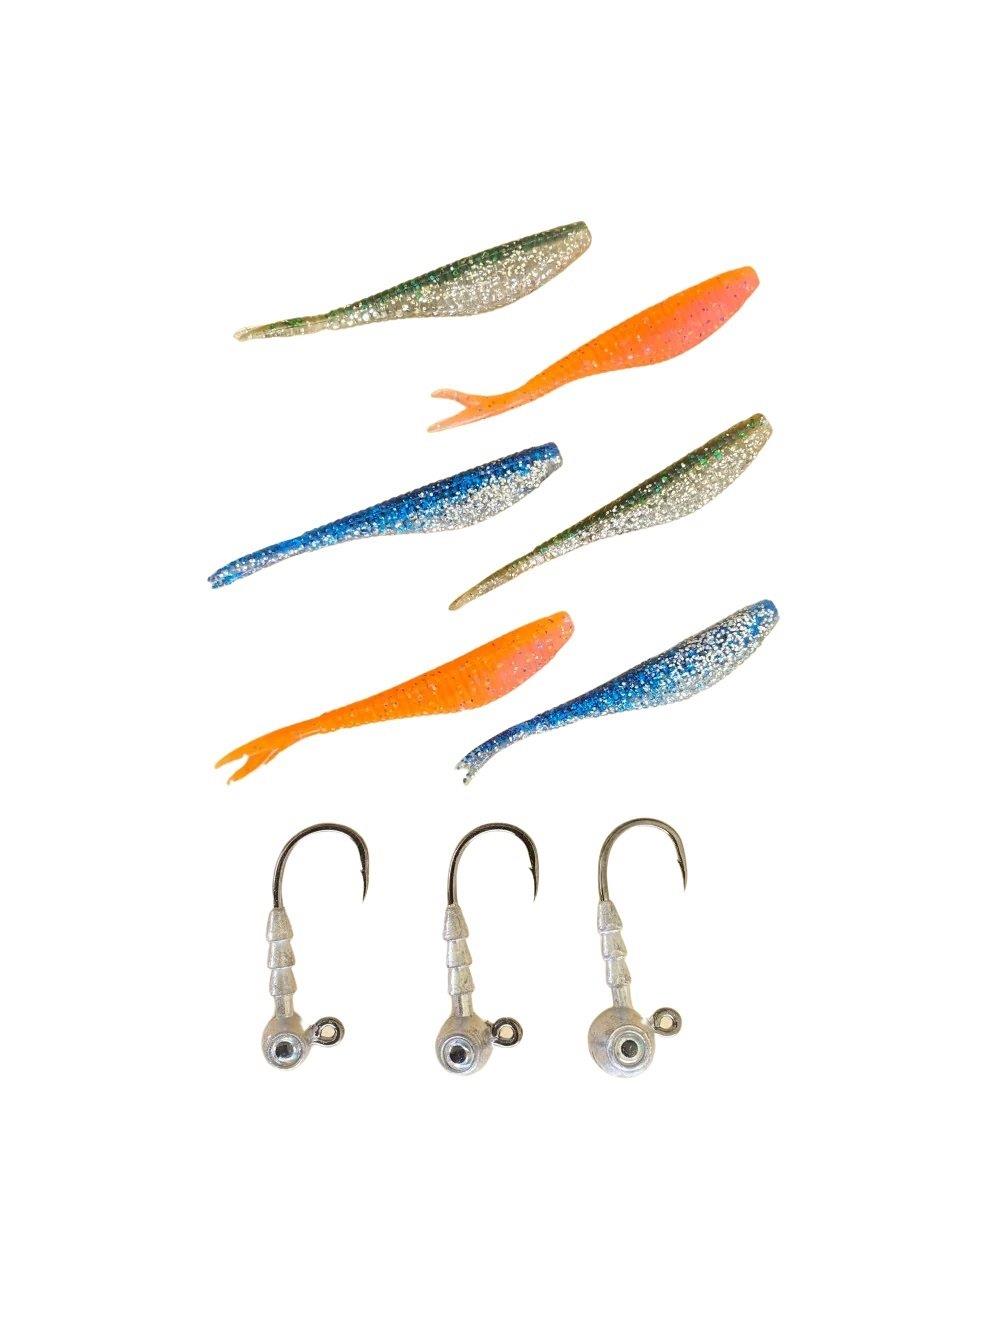 Glowbite Mighty Micro Shad Soft Bait Pack